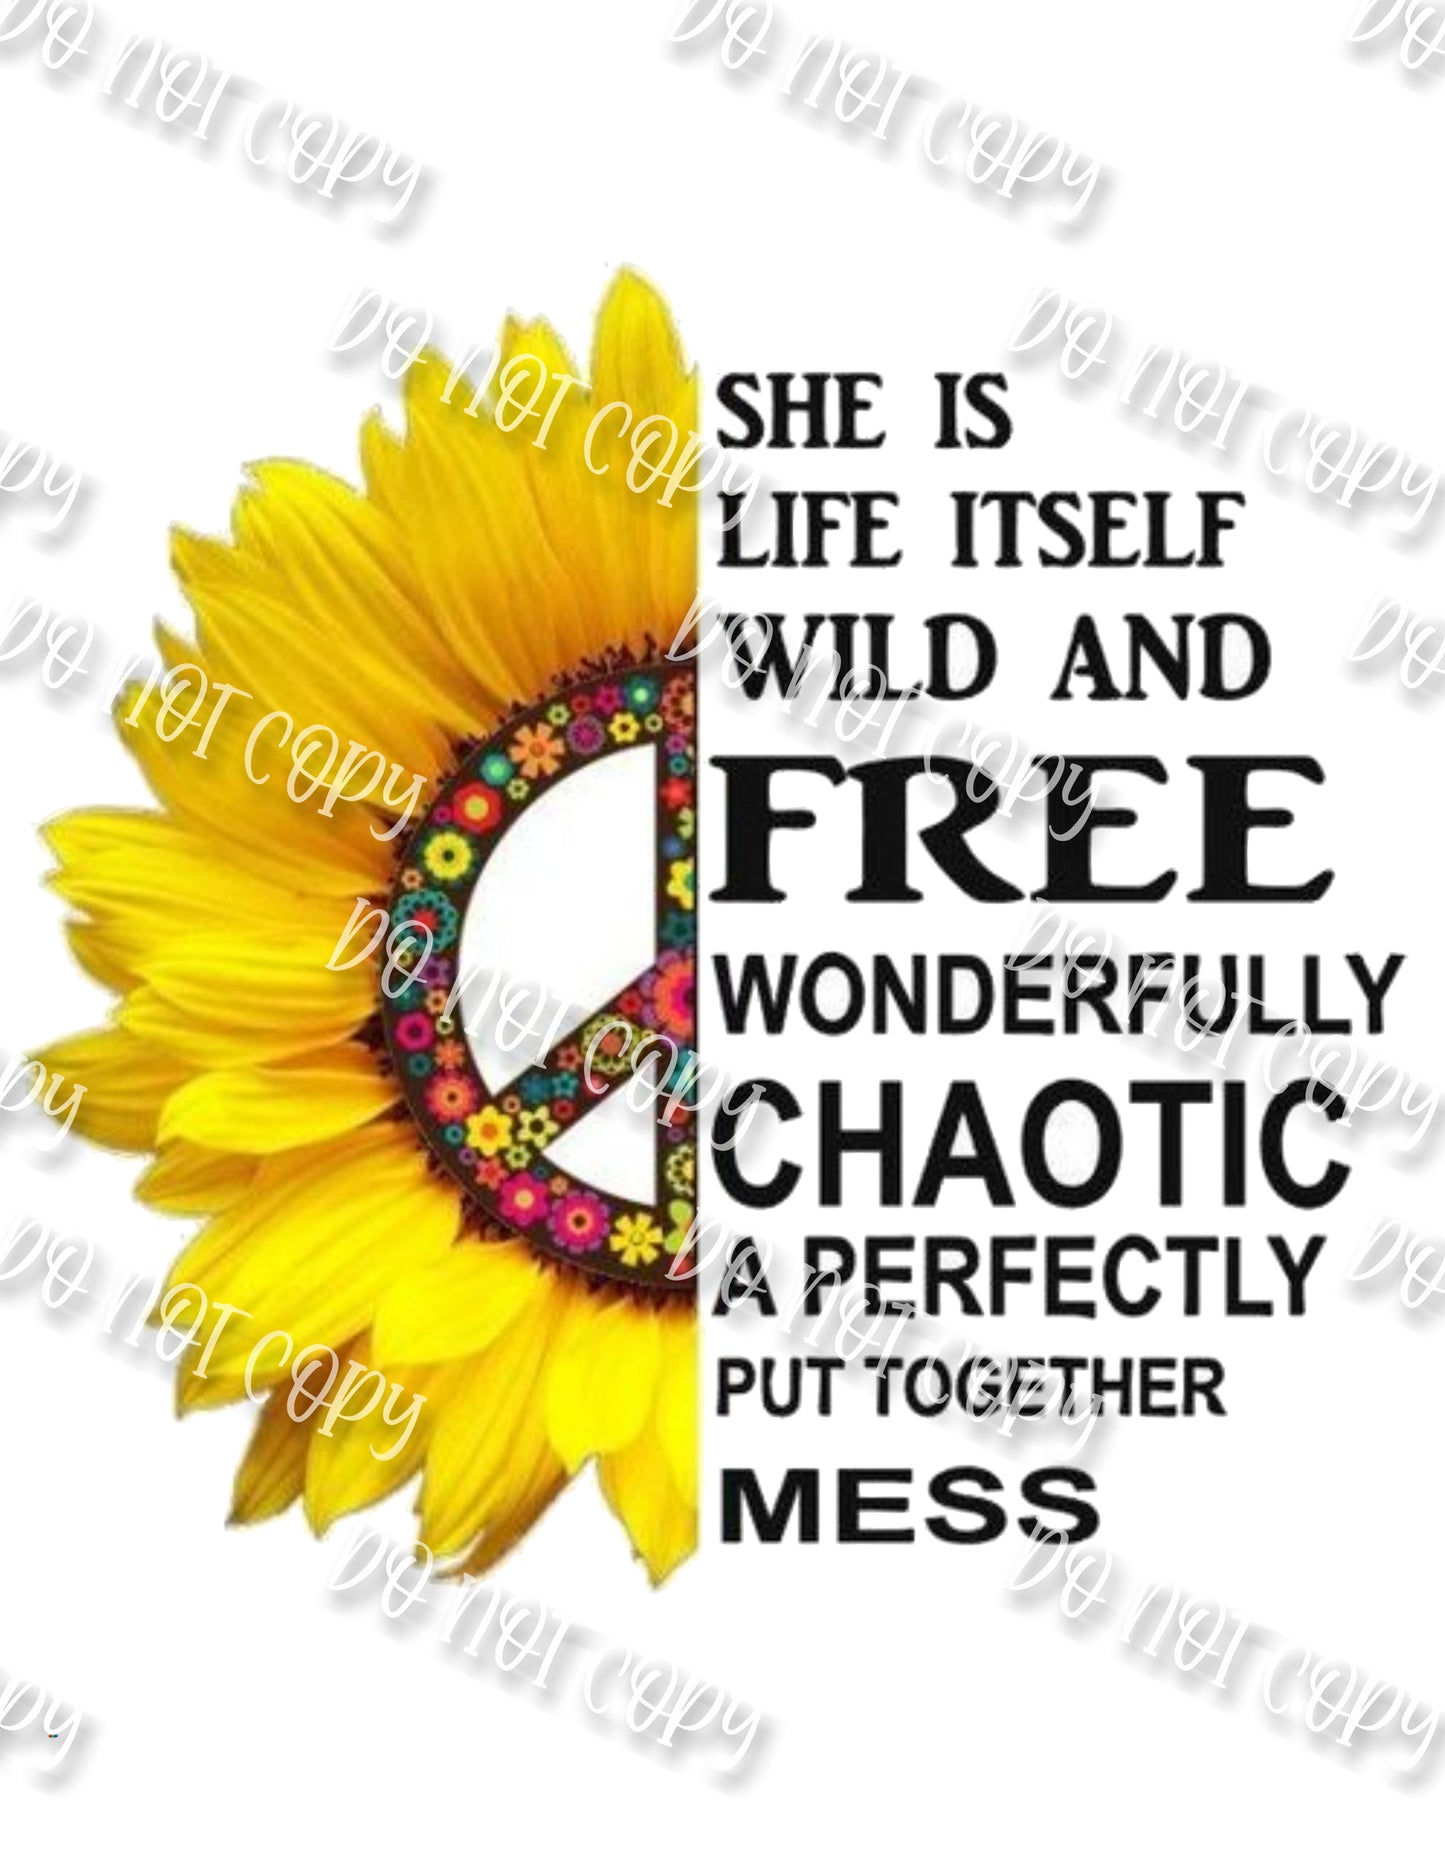 Sunflower Peace Free & Chaotic